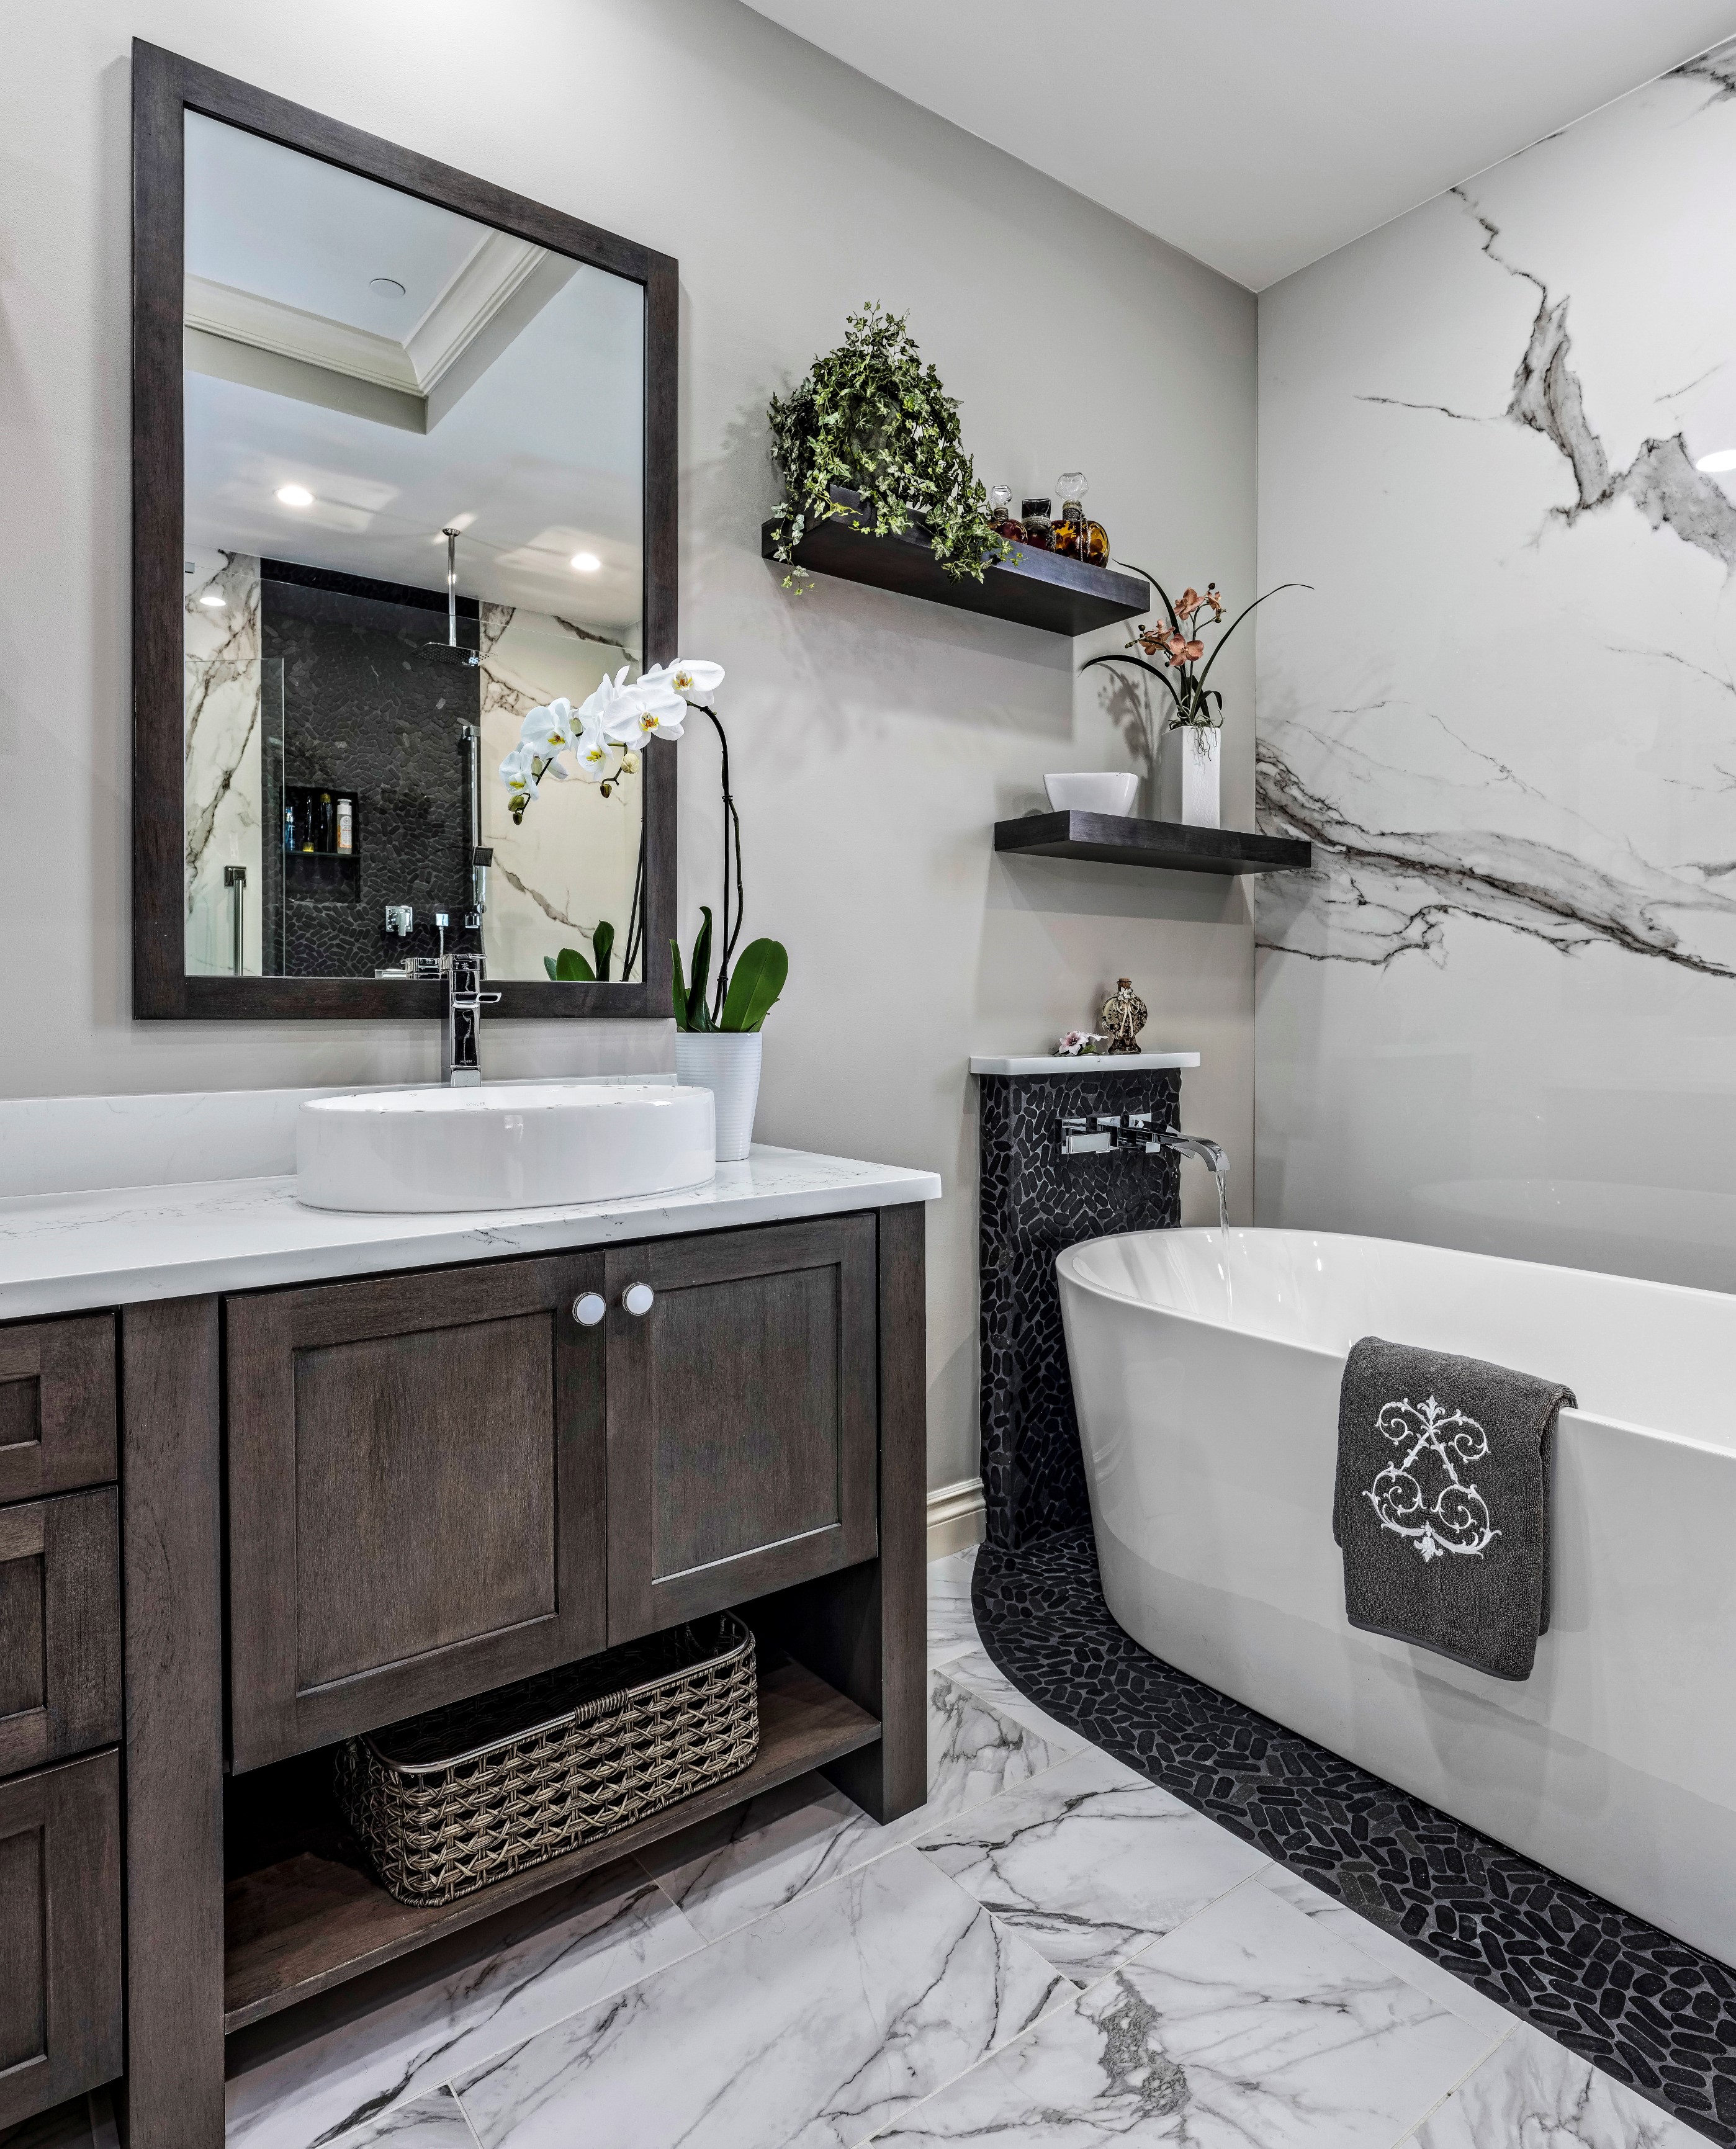 Bathroom Remodeling Typically Cost, How Much Does A Typical Small Bathroom Remodel Cost